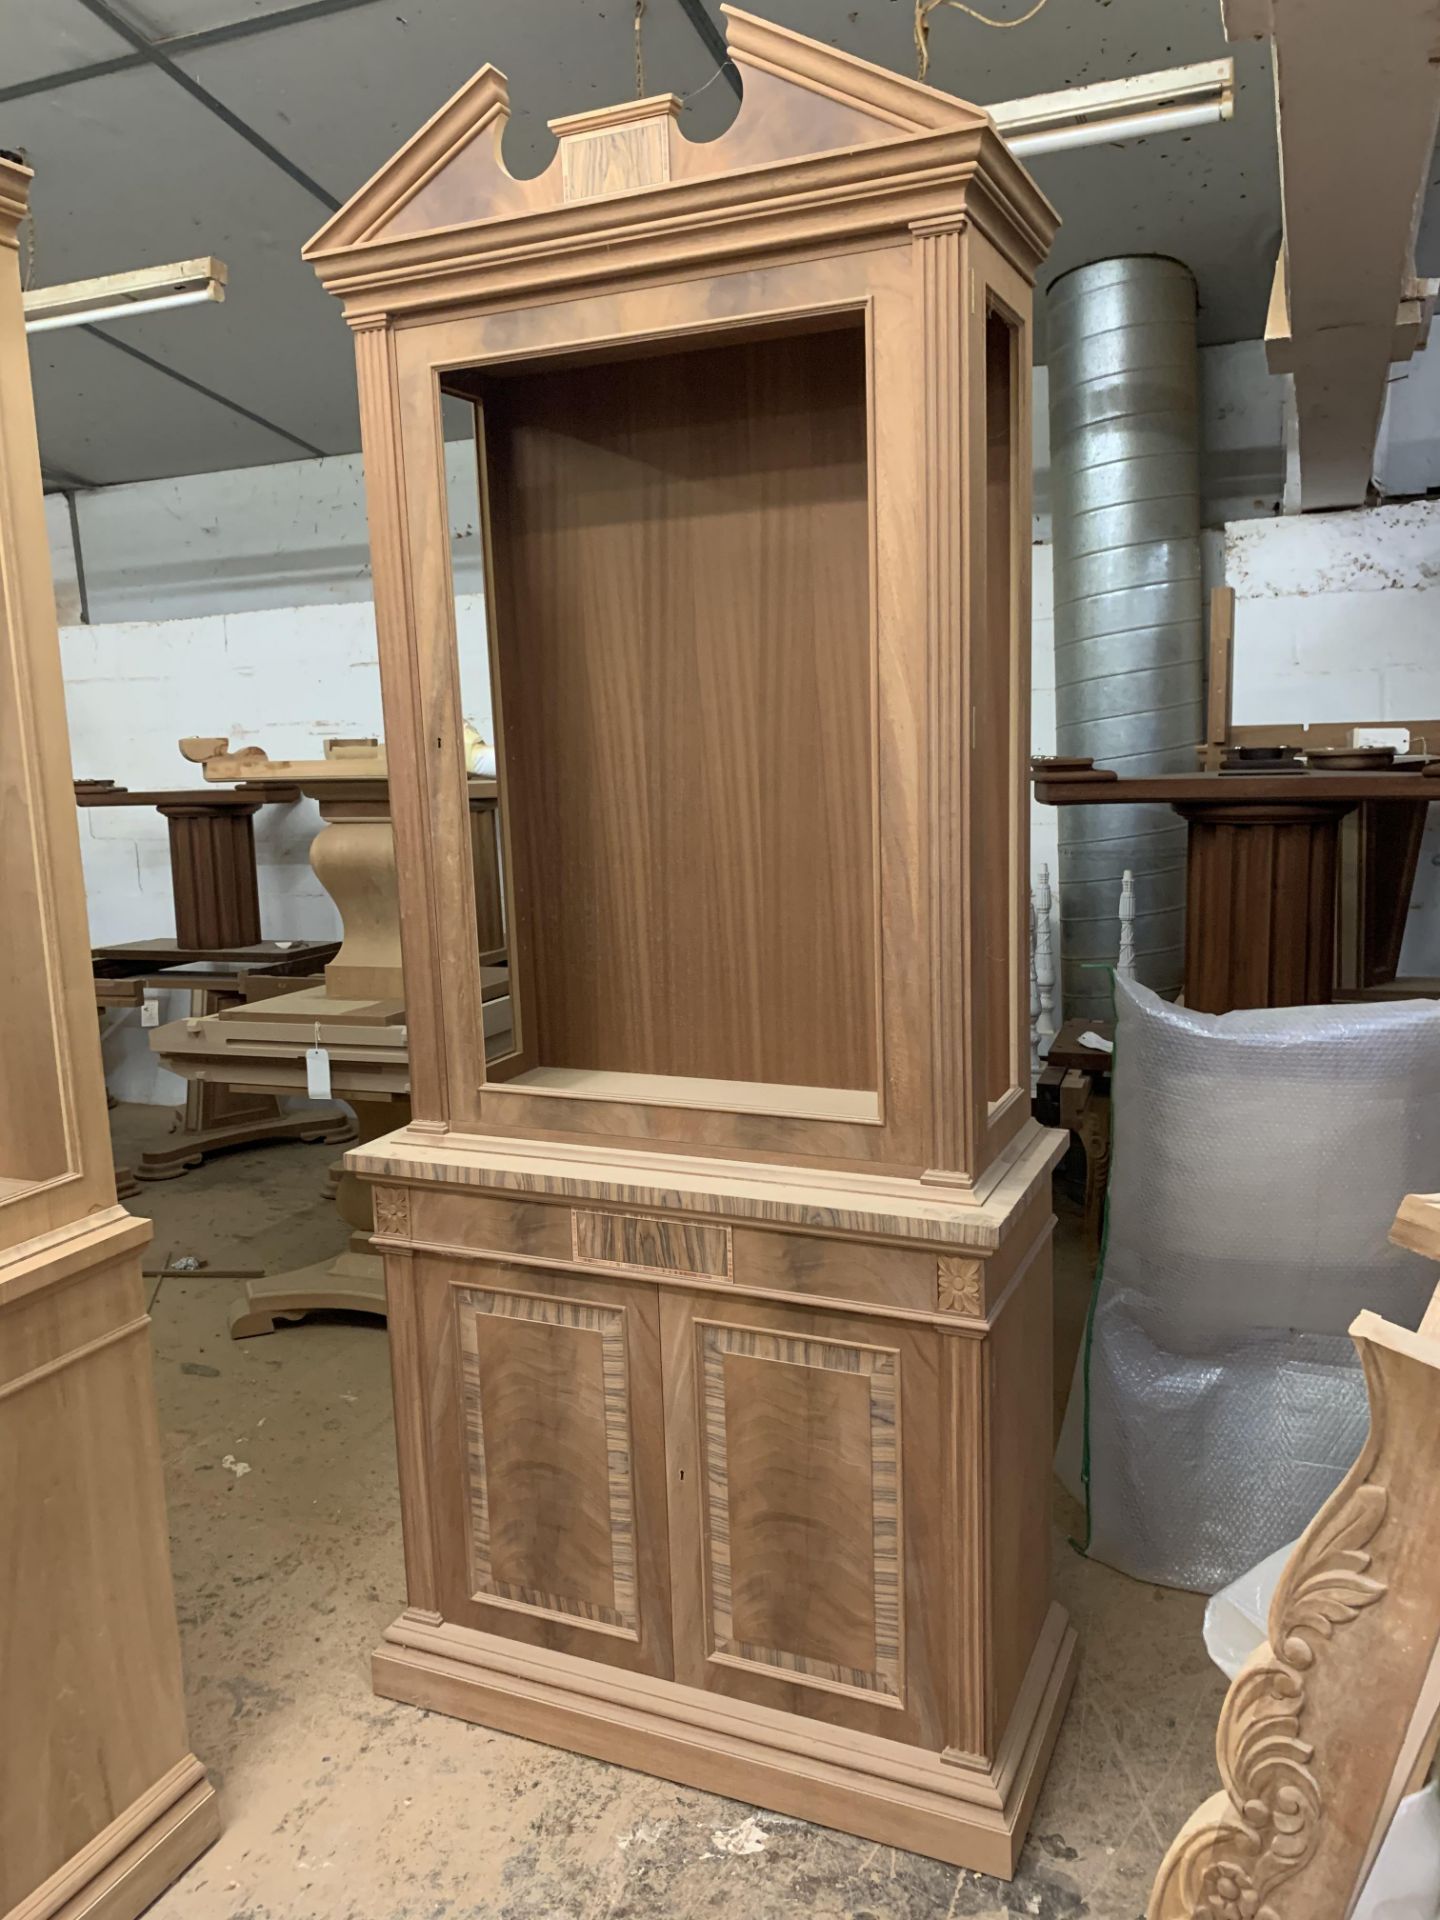 Two-door tall Bookcase, in mahogany finish, from the Corinthian range, requires finishing/polishing. - Image 3 of 3